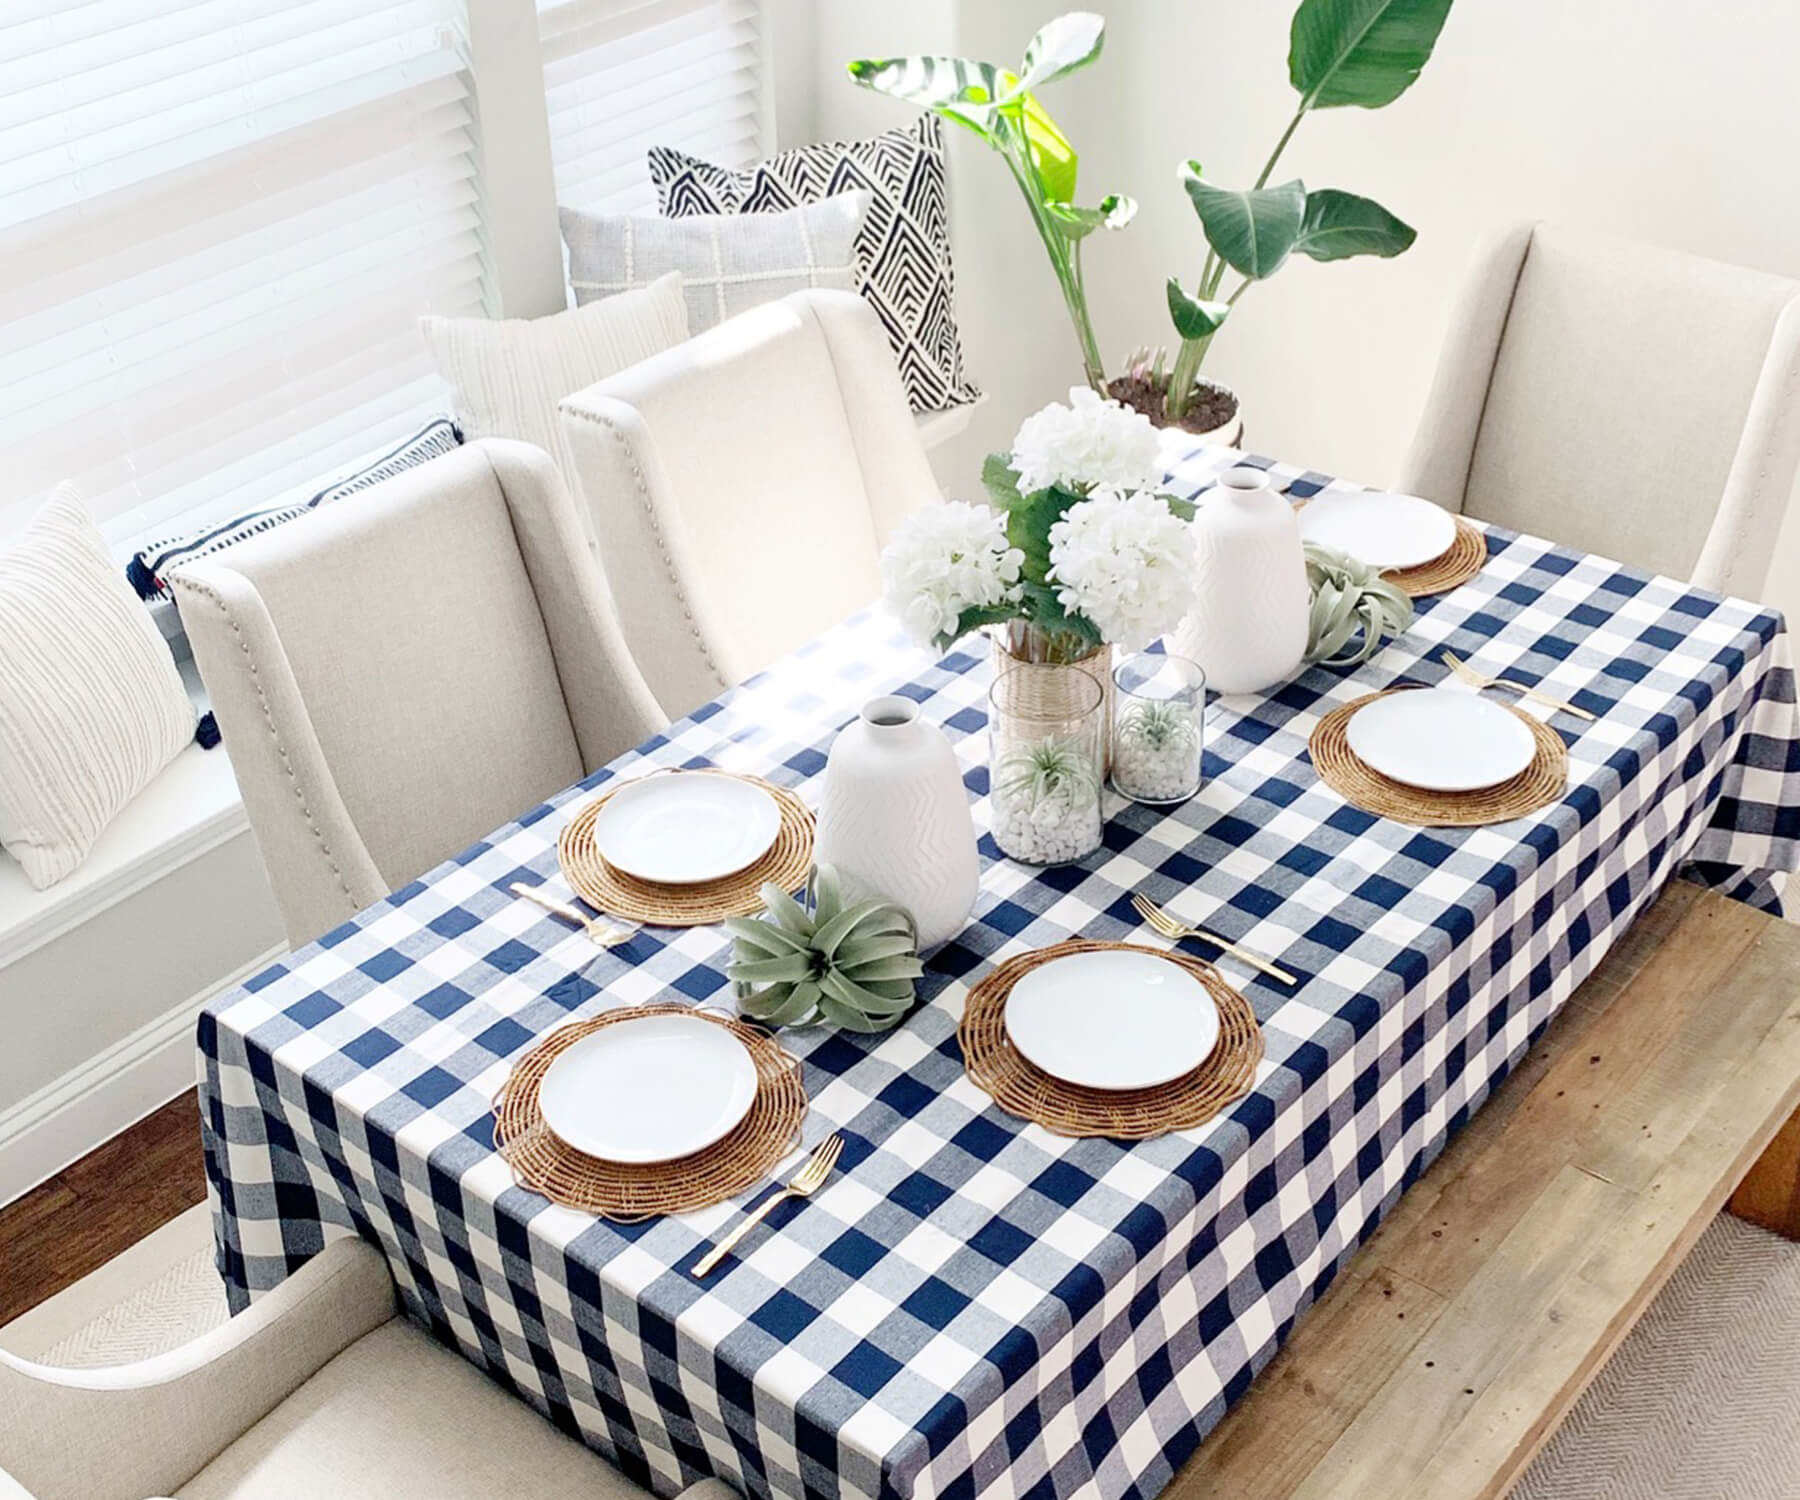 A cloth tablecloth is a versatile fabric covering for tables, suitable for various occasions and settings.